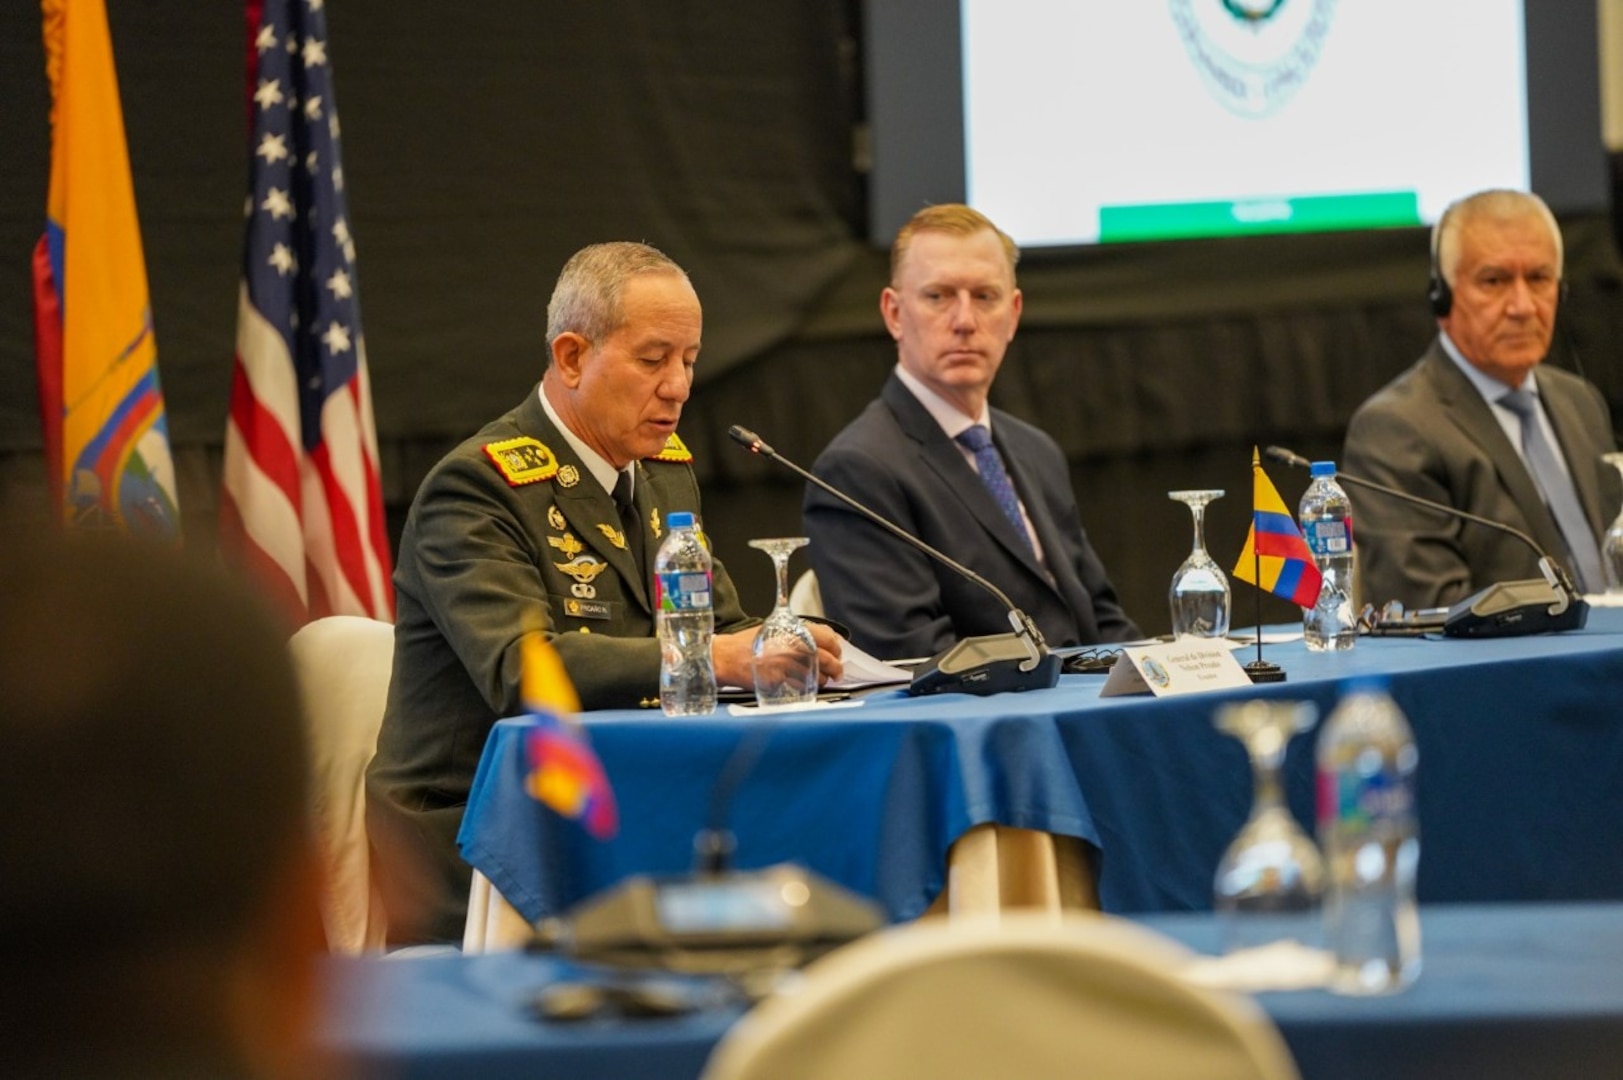 Gen. Nelson Proaño, commander Ecuador’s armed forces, addresses attendees during the opening ceremony of the South American Defense Conference 2022 (SOUTHDEC 22).